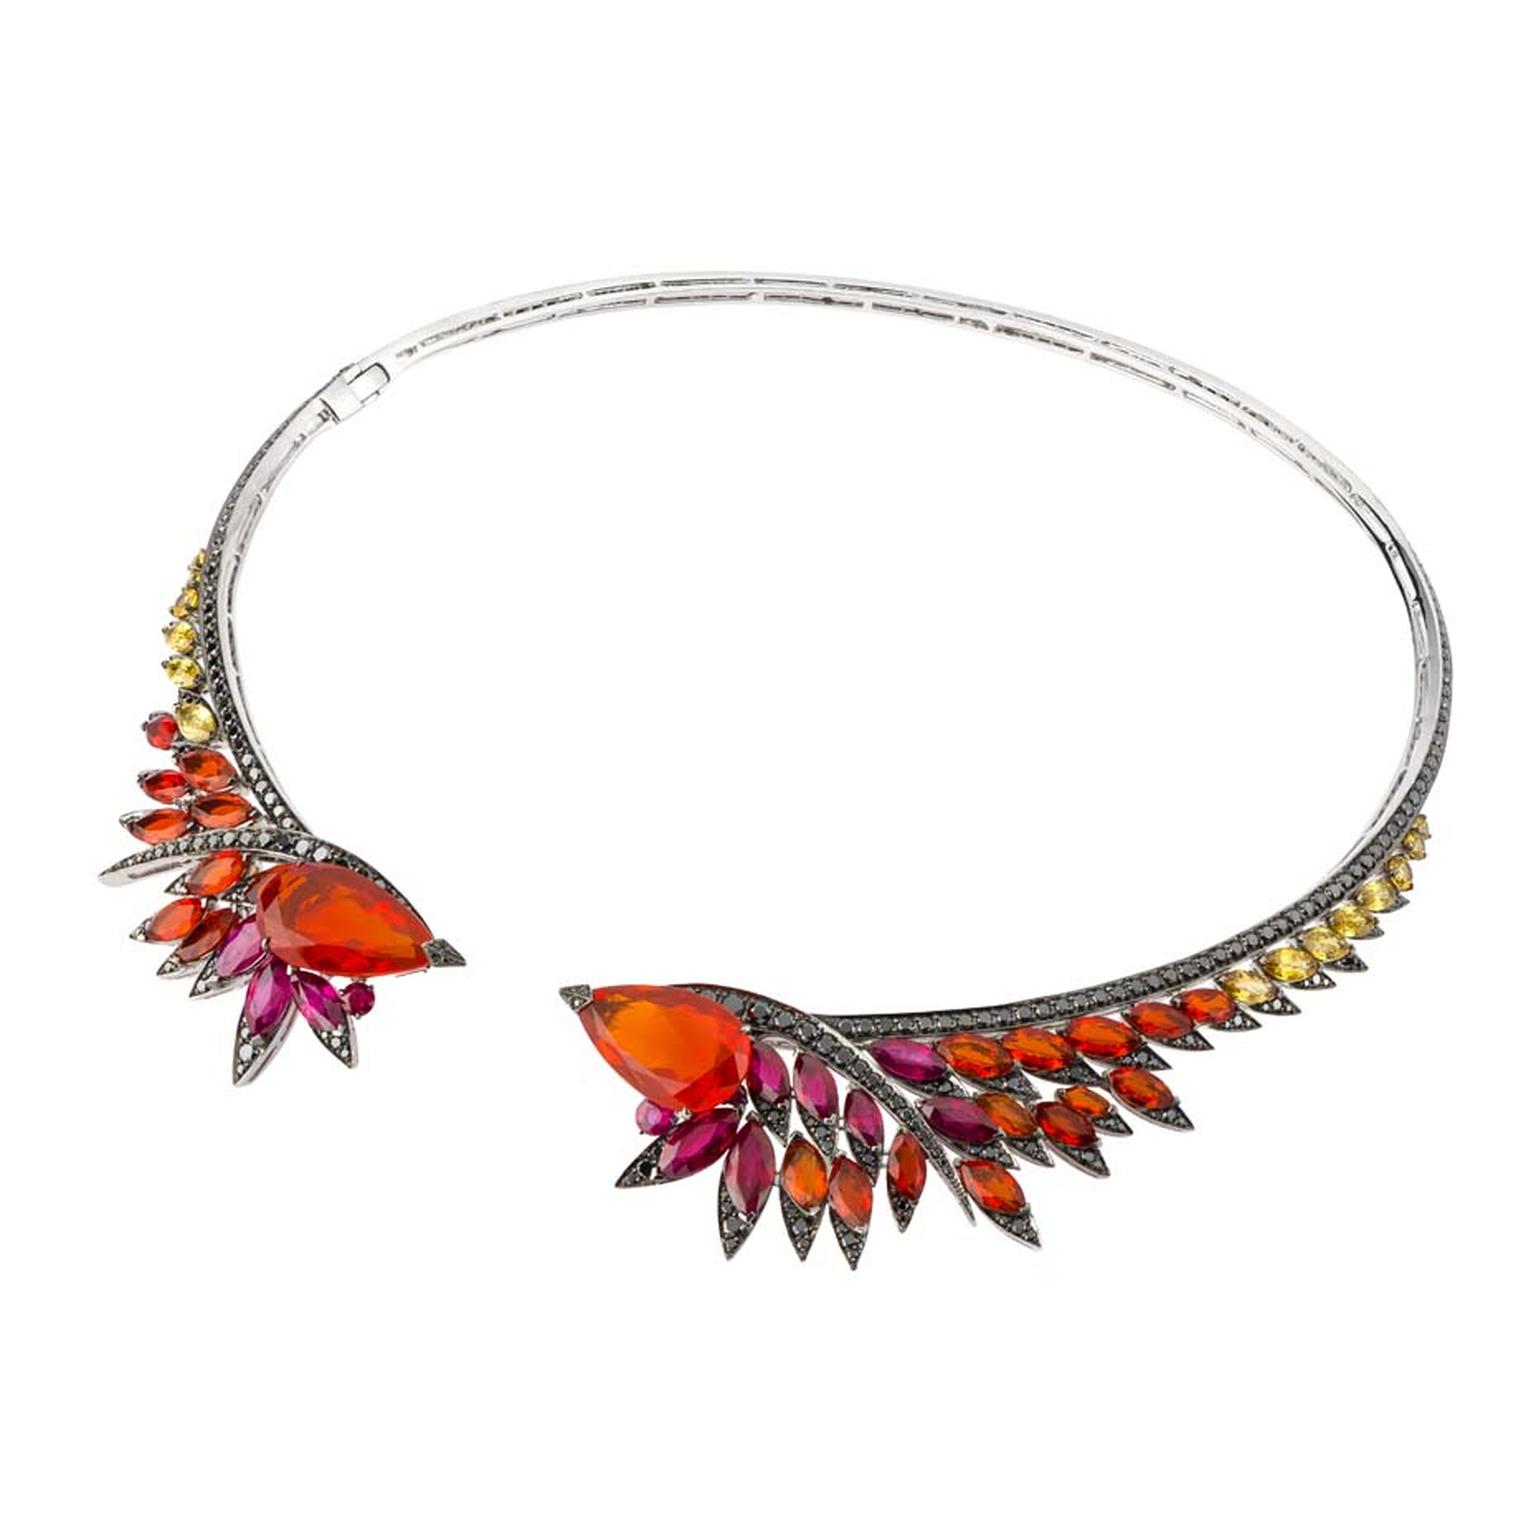 Stephen Webster Magnipheasant Plummage couture collar necklace in white gold set with black diamond pavé, marquise-shaped rubies, fire opals, yellow sapphires, and central pear-shaped fire opals ($80,000).